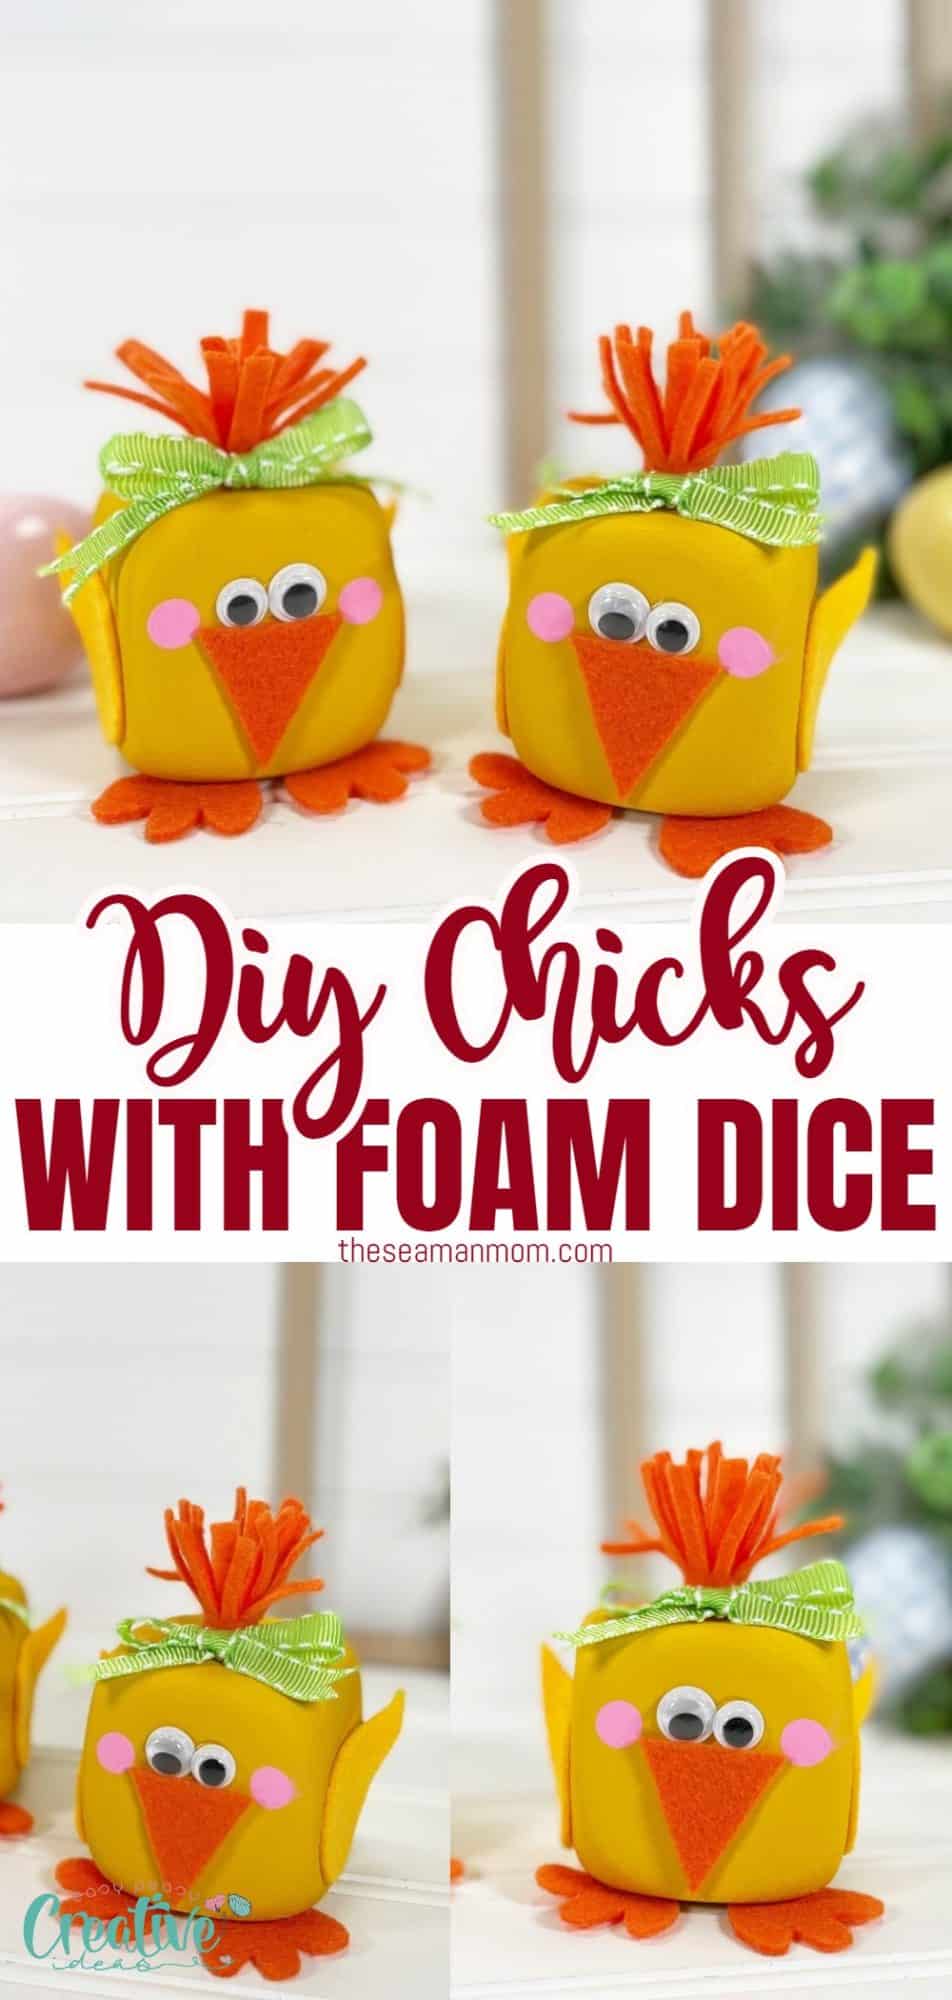 Photo collage of chick craft for Easter made with foam dice